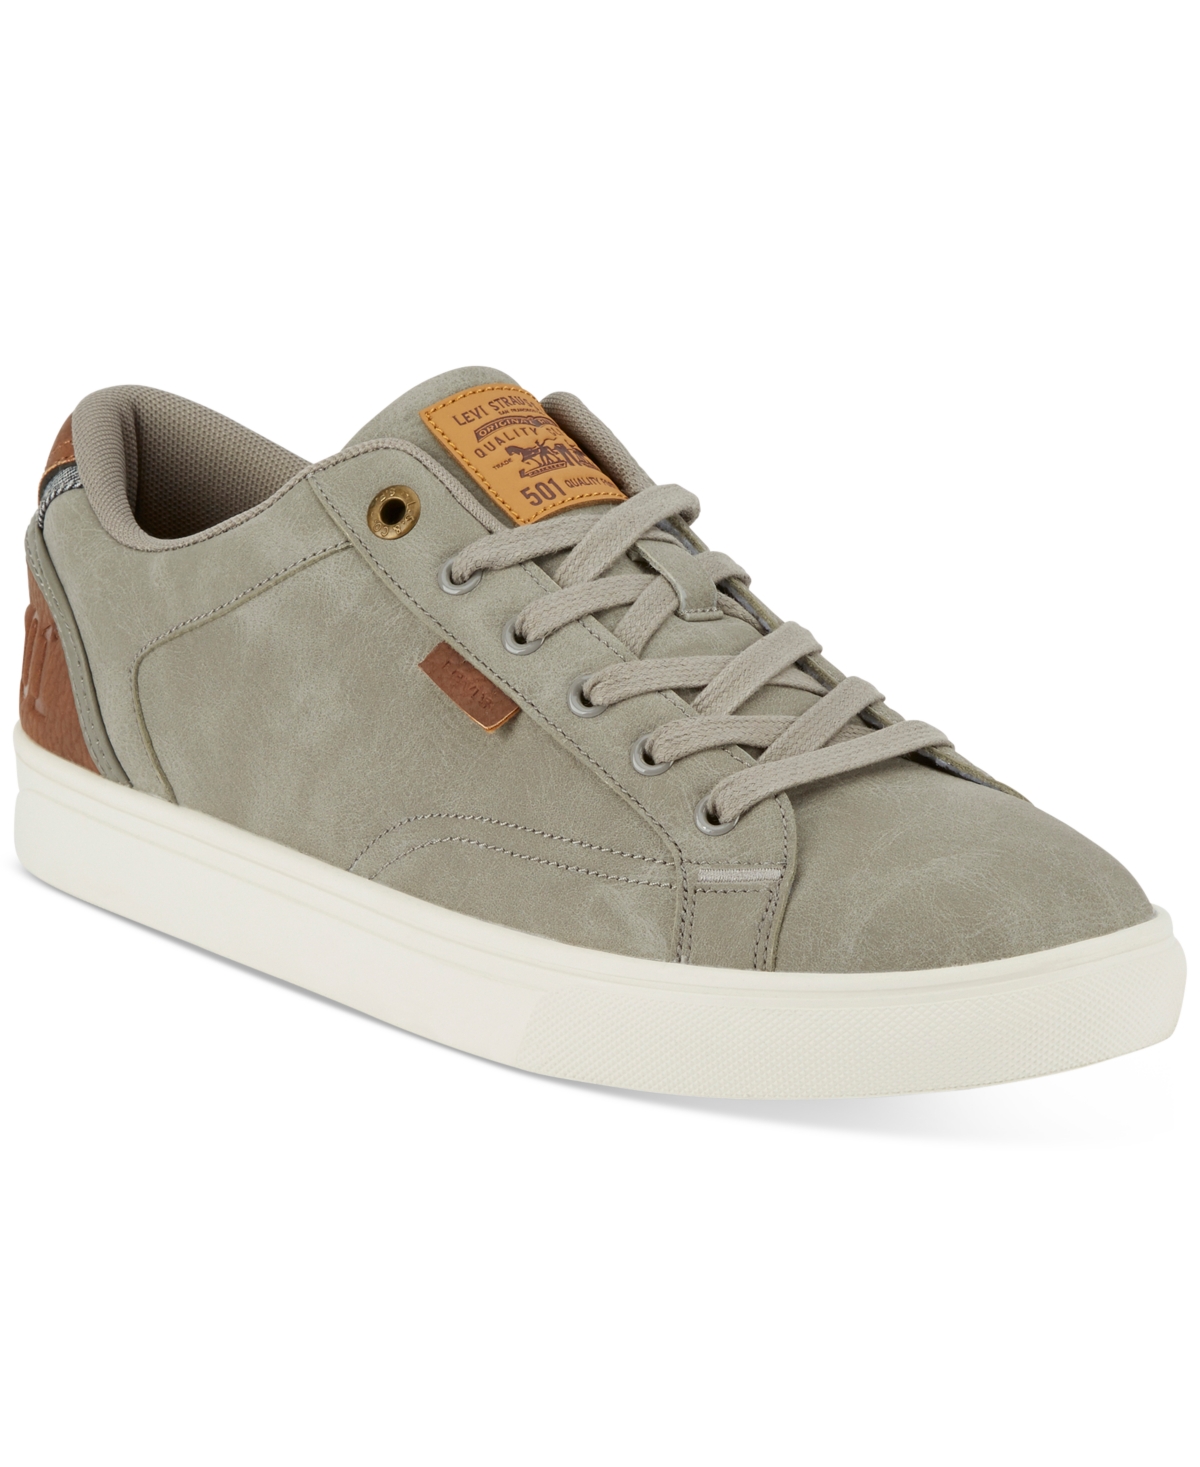 UPC 191605775445 product image for Levi's Men's Jeffrey 501 Waxed Faux-Leather Sneakers Men's Shoes | upcitemdb.com